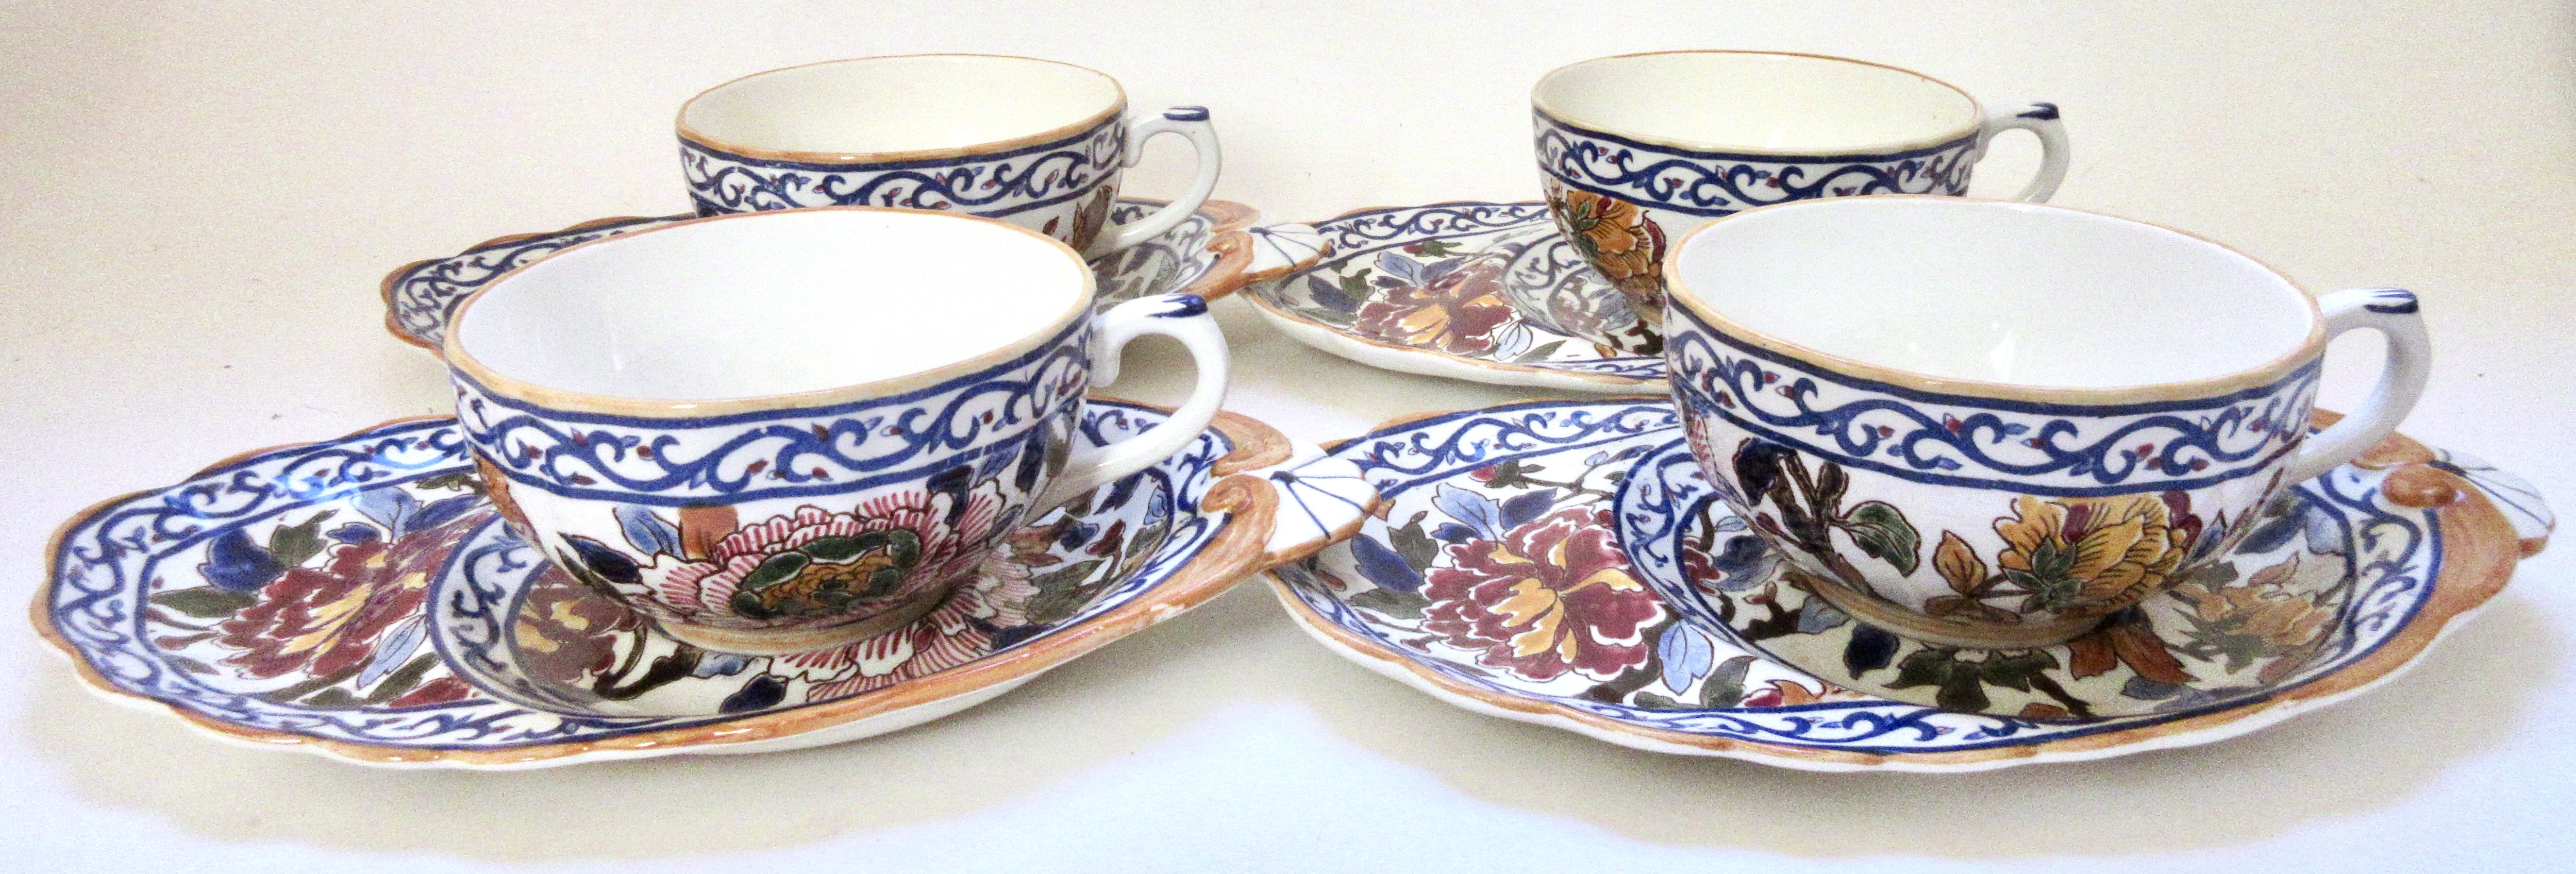 French Faience Peonies Breakfast Sets~P77678698